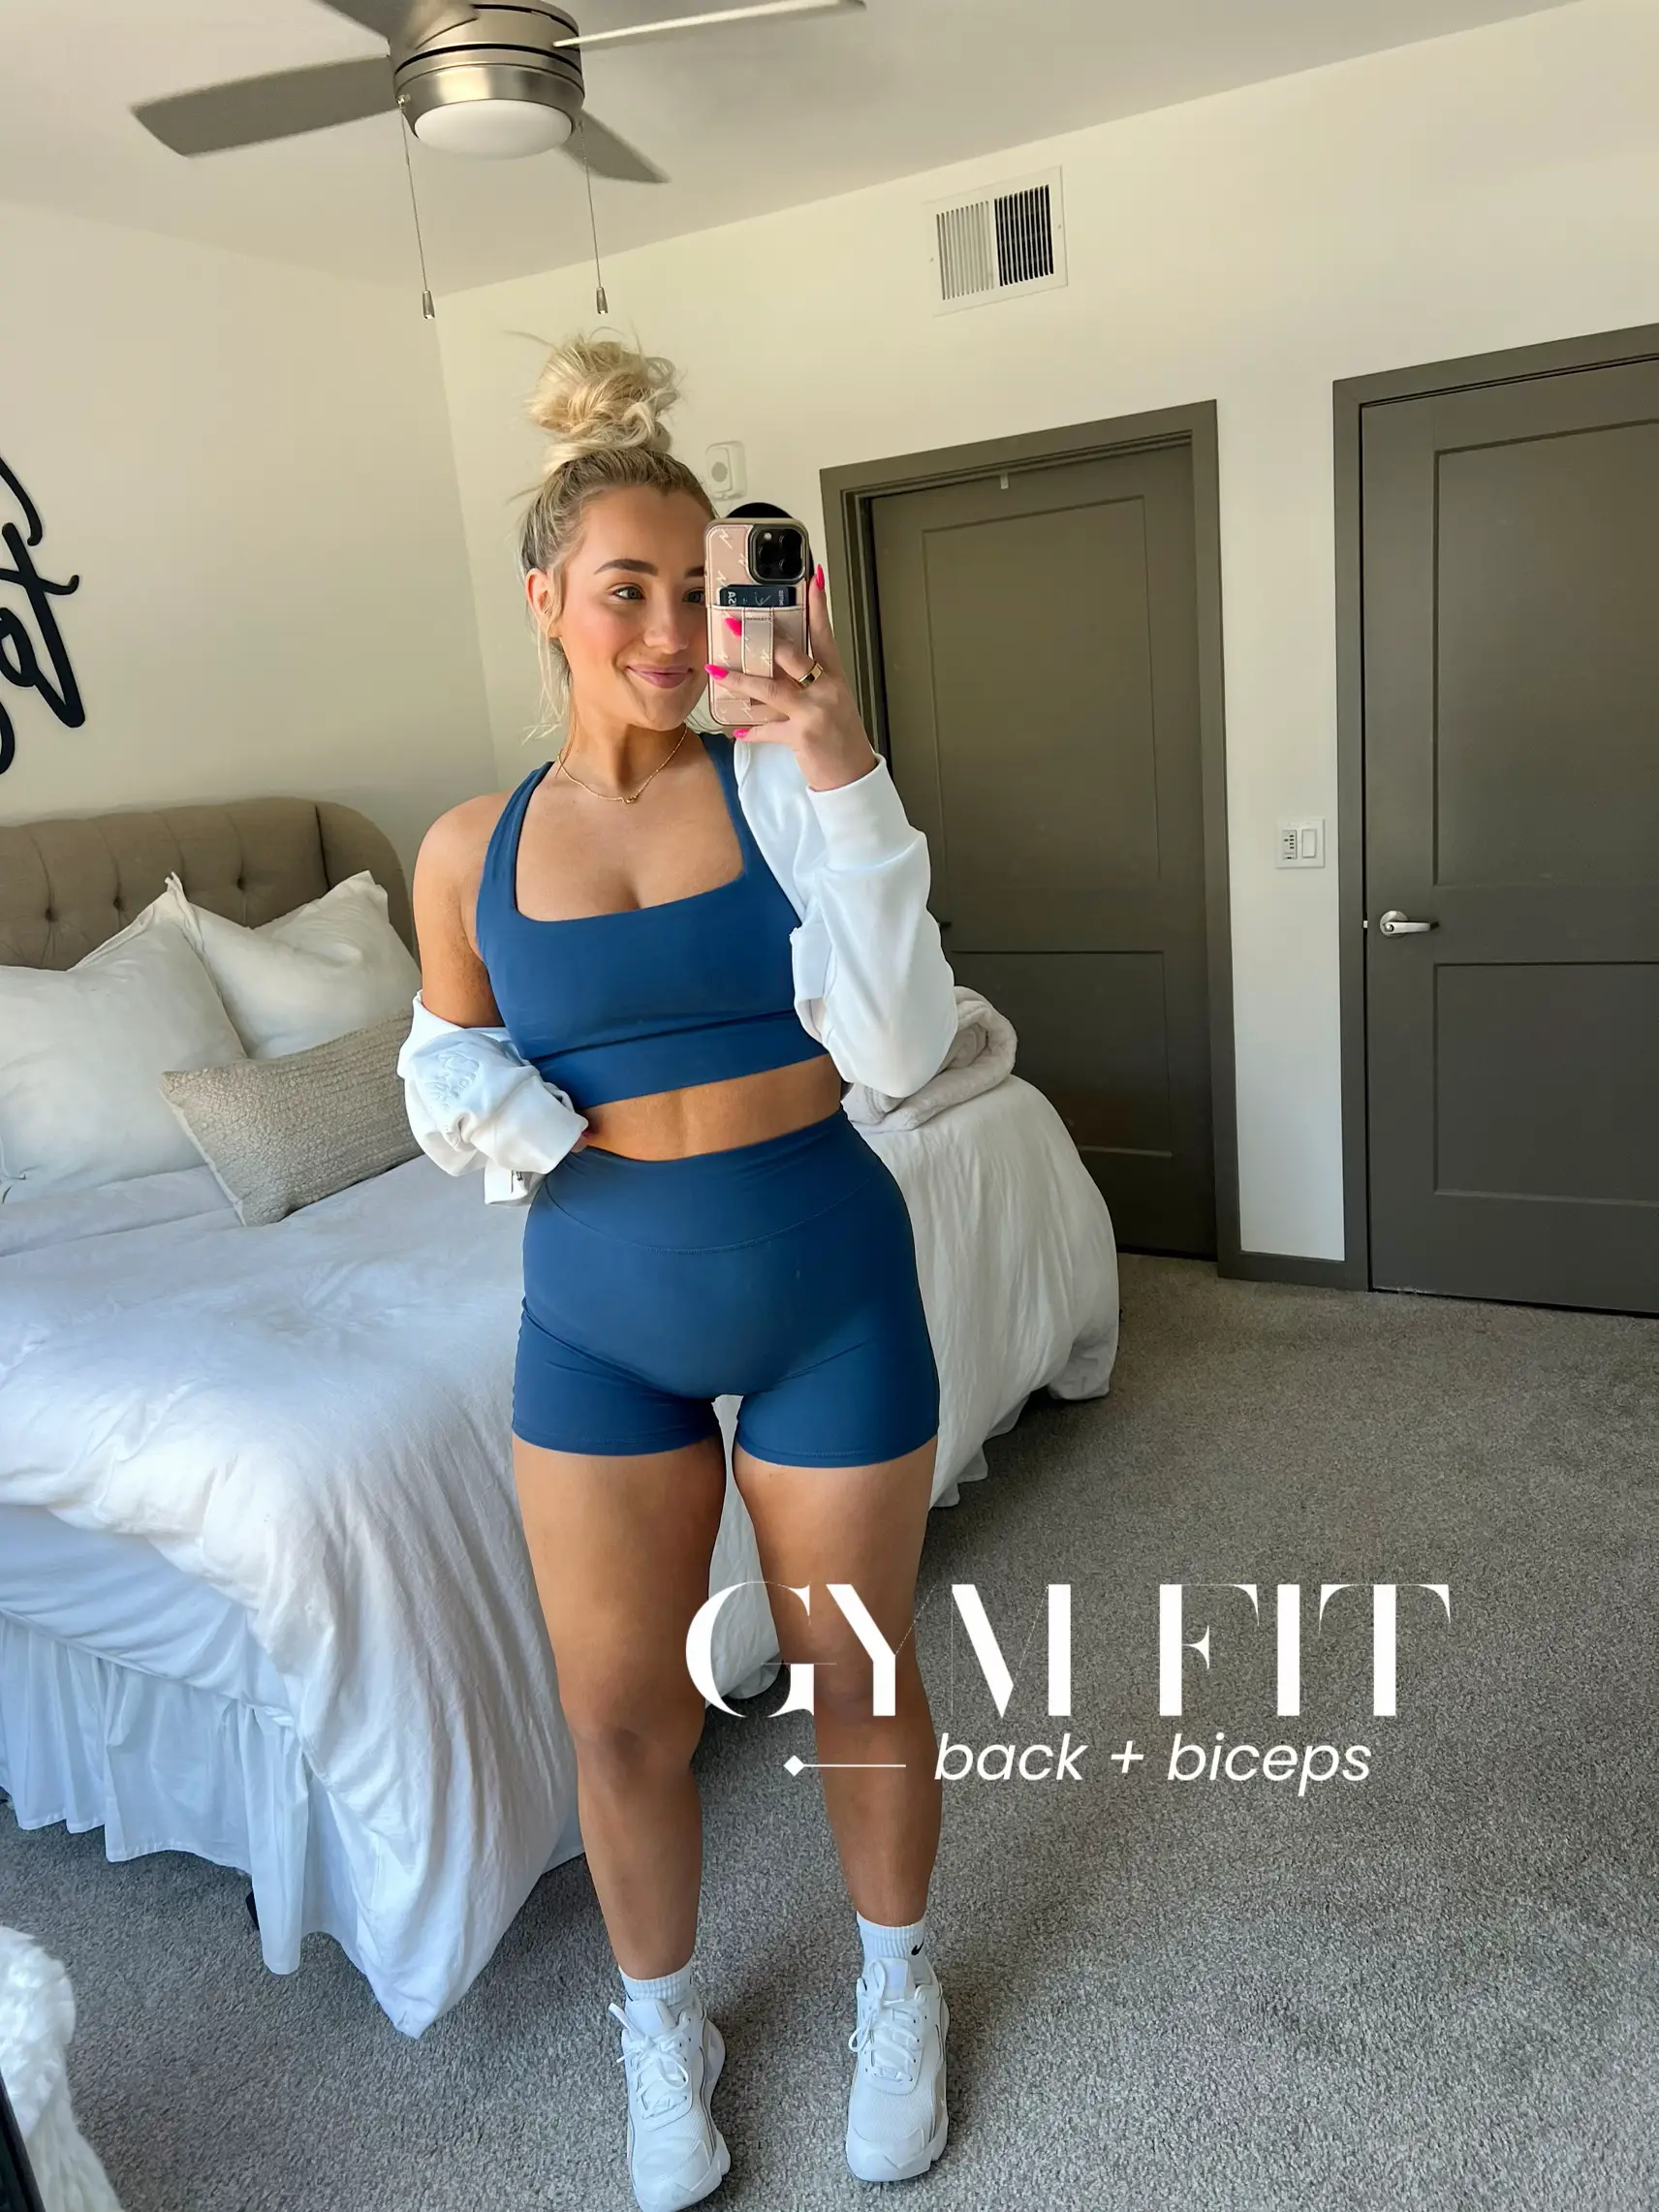 #GymFit of the day 💪🏼💓☁️ | Gallery posted by Amy Jo | Lemon8